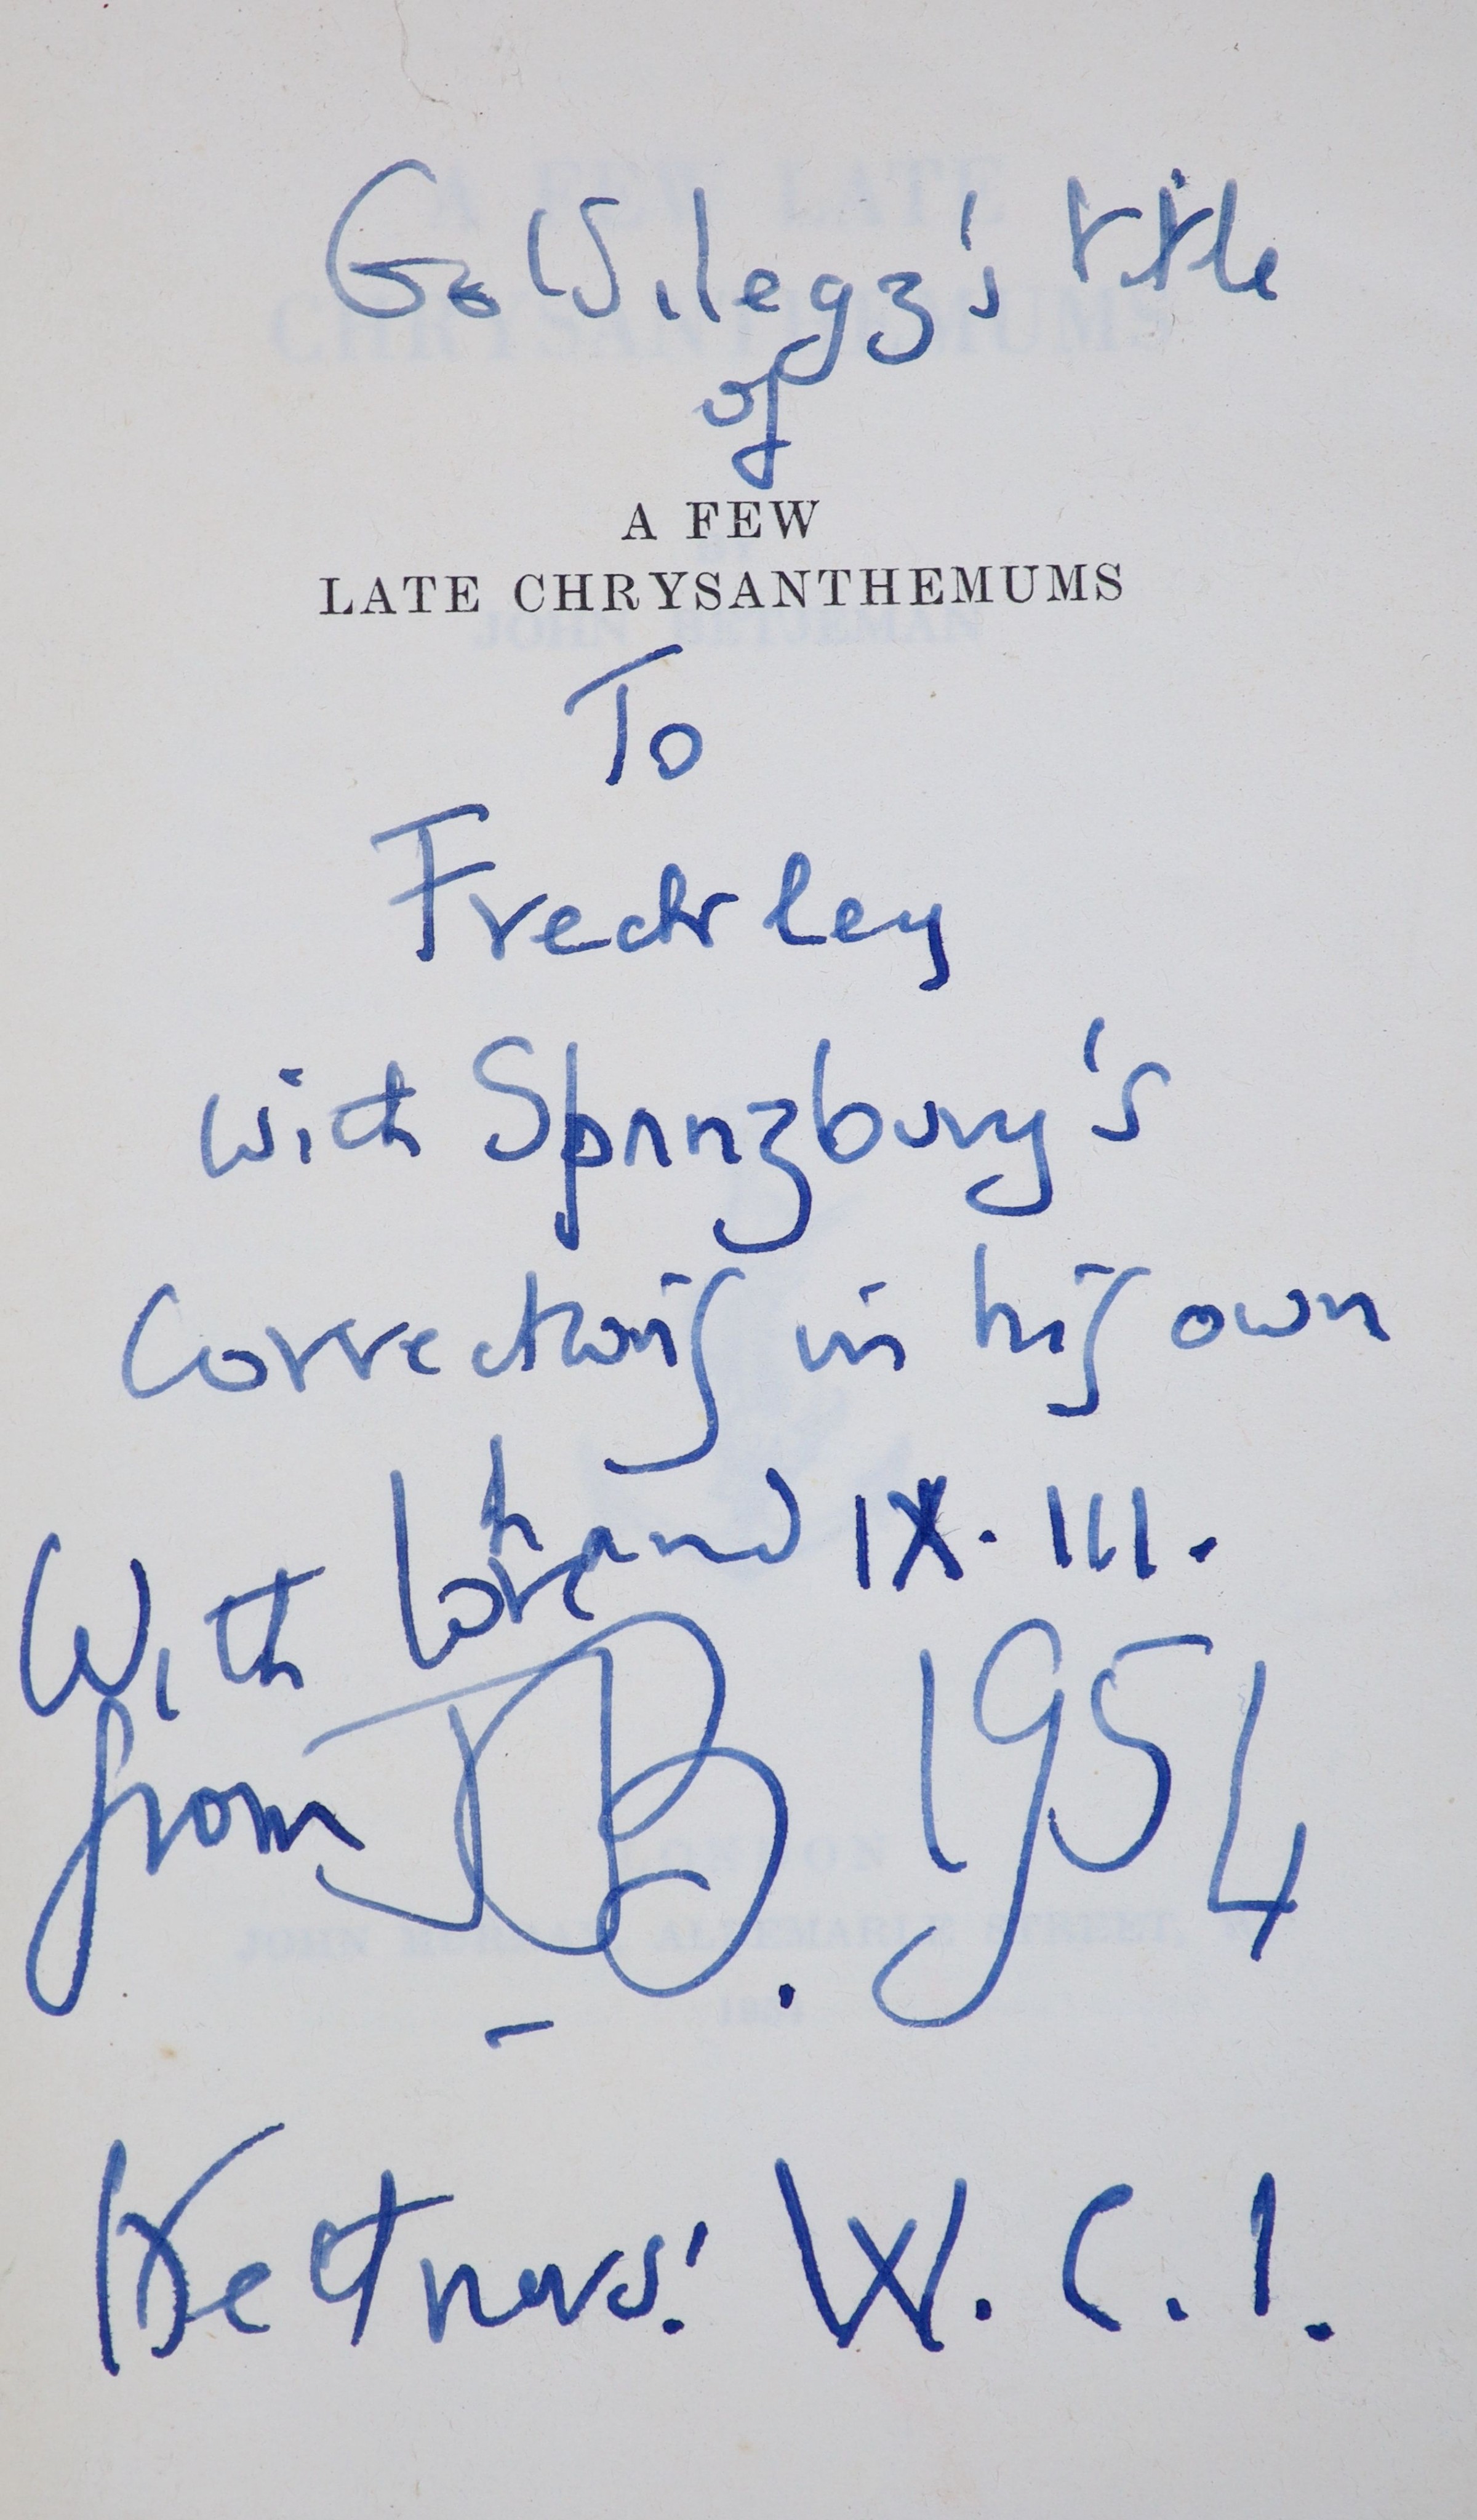 Betjaman, John, Sir - A Few Late Chrysanthemums, the authors uncorrected proof copy, 12mo, limp wrappers, half title with authors ink presentation inscription - ‘’To Freckley [Jill Menzies], with Spanzbury’s corrections